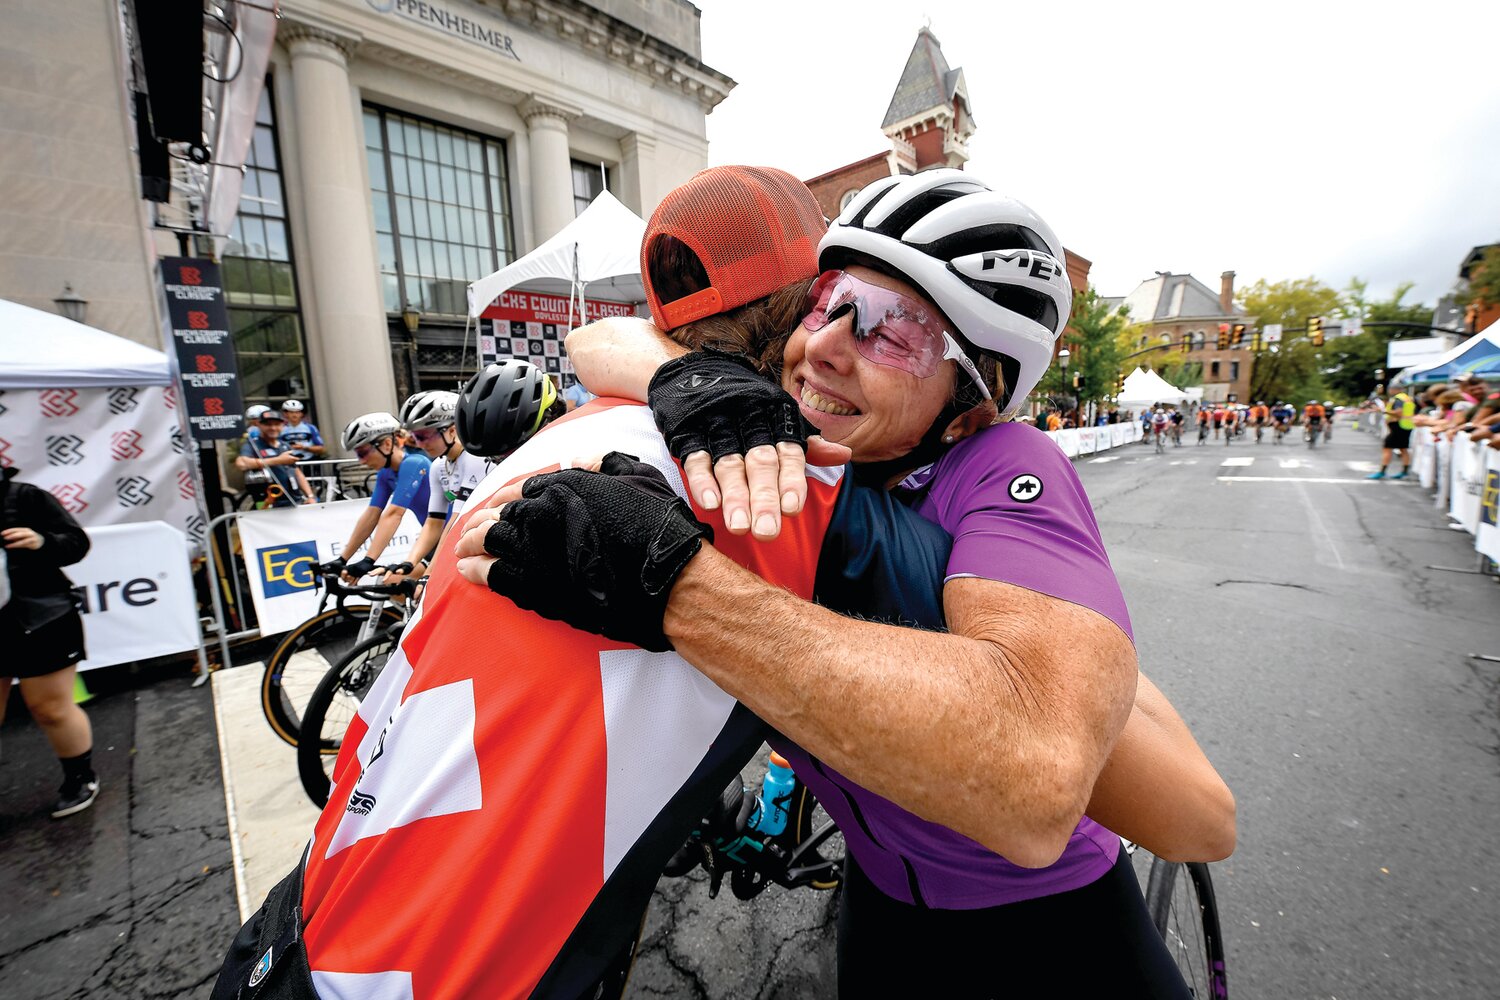 Cycling legend Laura Van Gilder gets a hug at the start line from race director Laura Reppert. Van Gilder is a Pocono native and is widely considered one of the best women’s cyclist in American history.